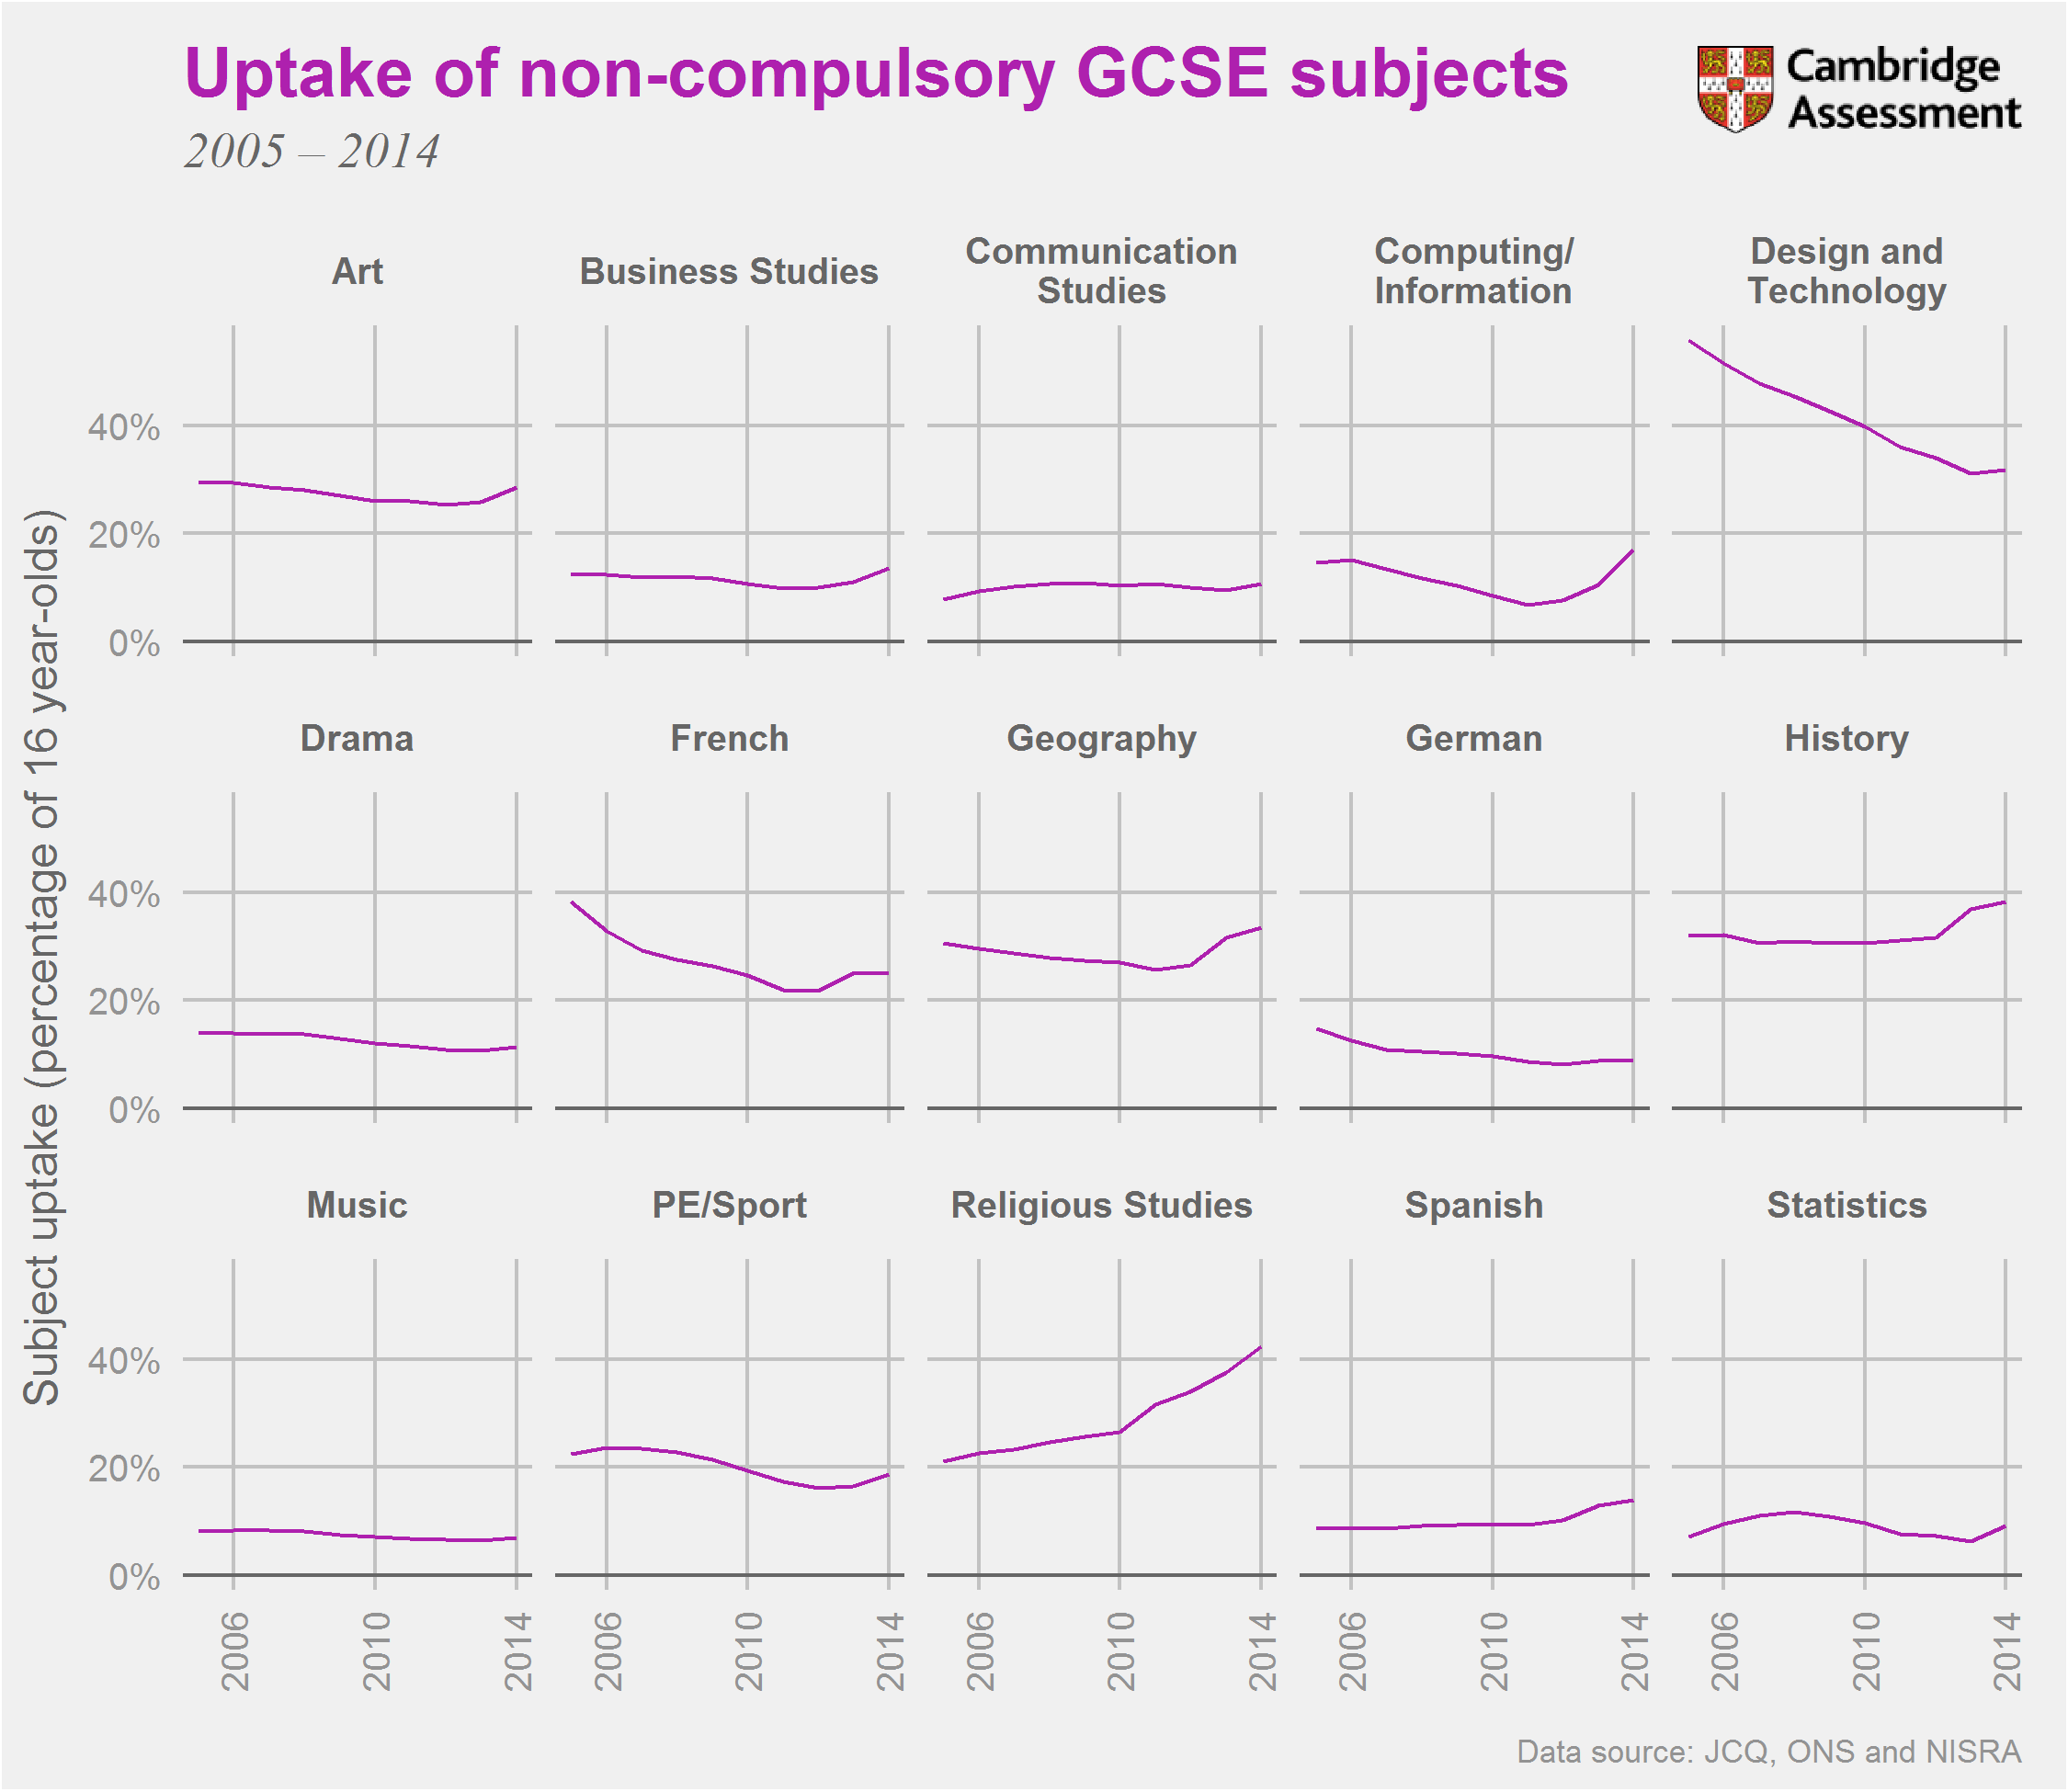 The Most Popular Non Compulsory Gcse Subjects In The Period 05 14 Cambridge Assessment